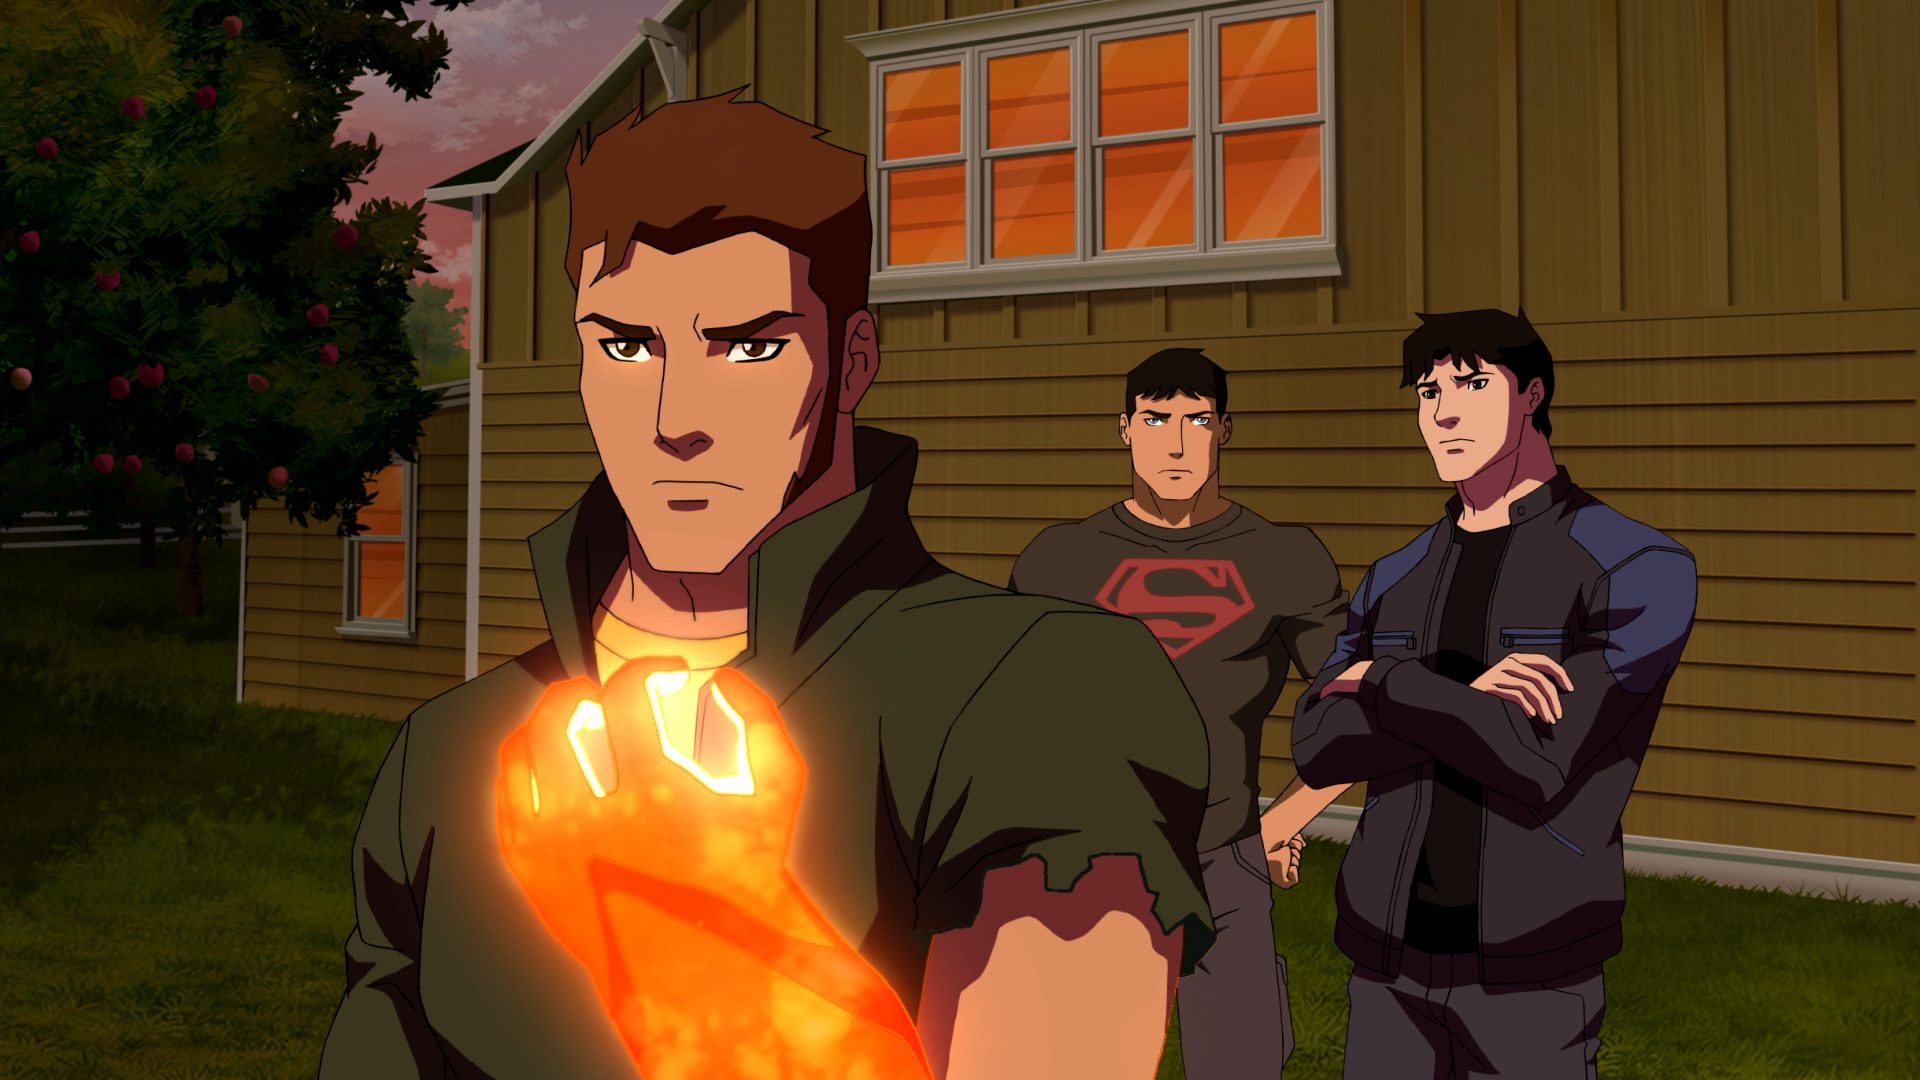 The Future of 'Young Justice' Hangs in the Balance A Glimpse into Season 5's Potential